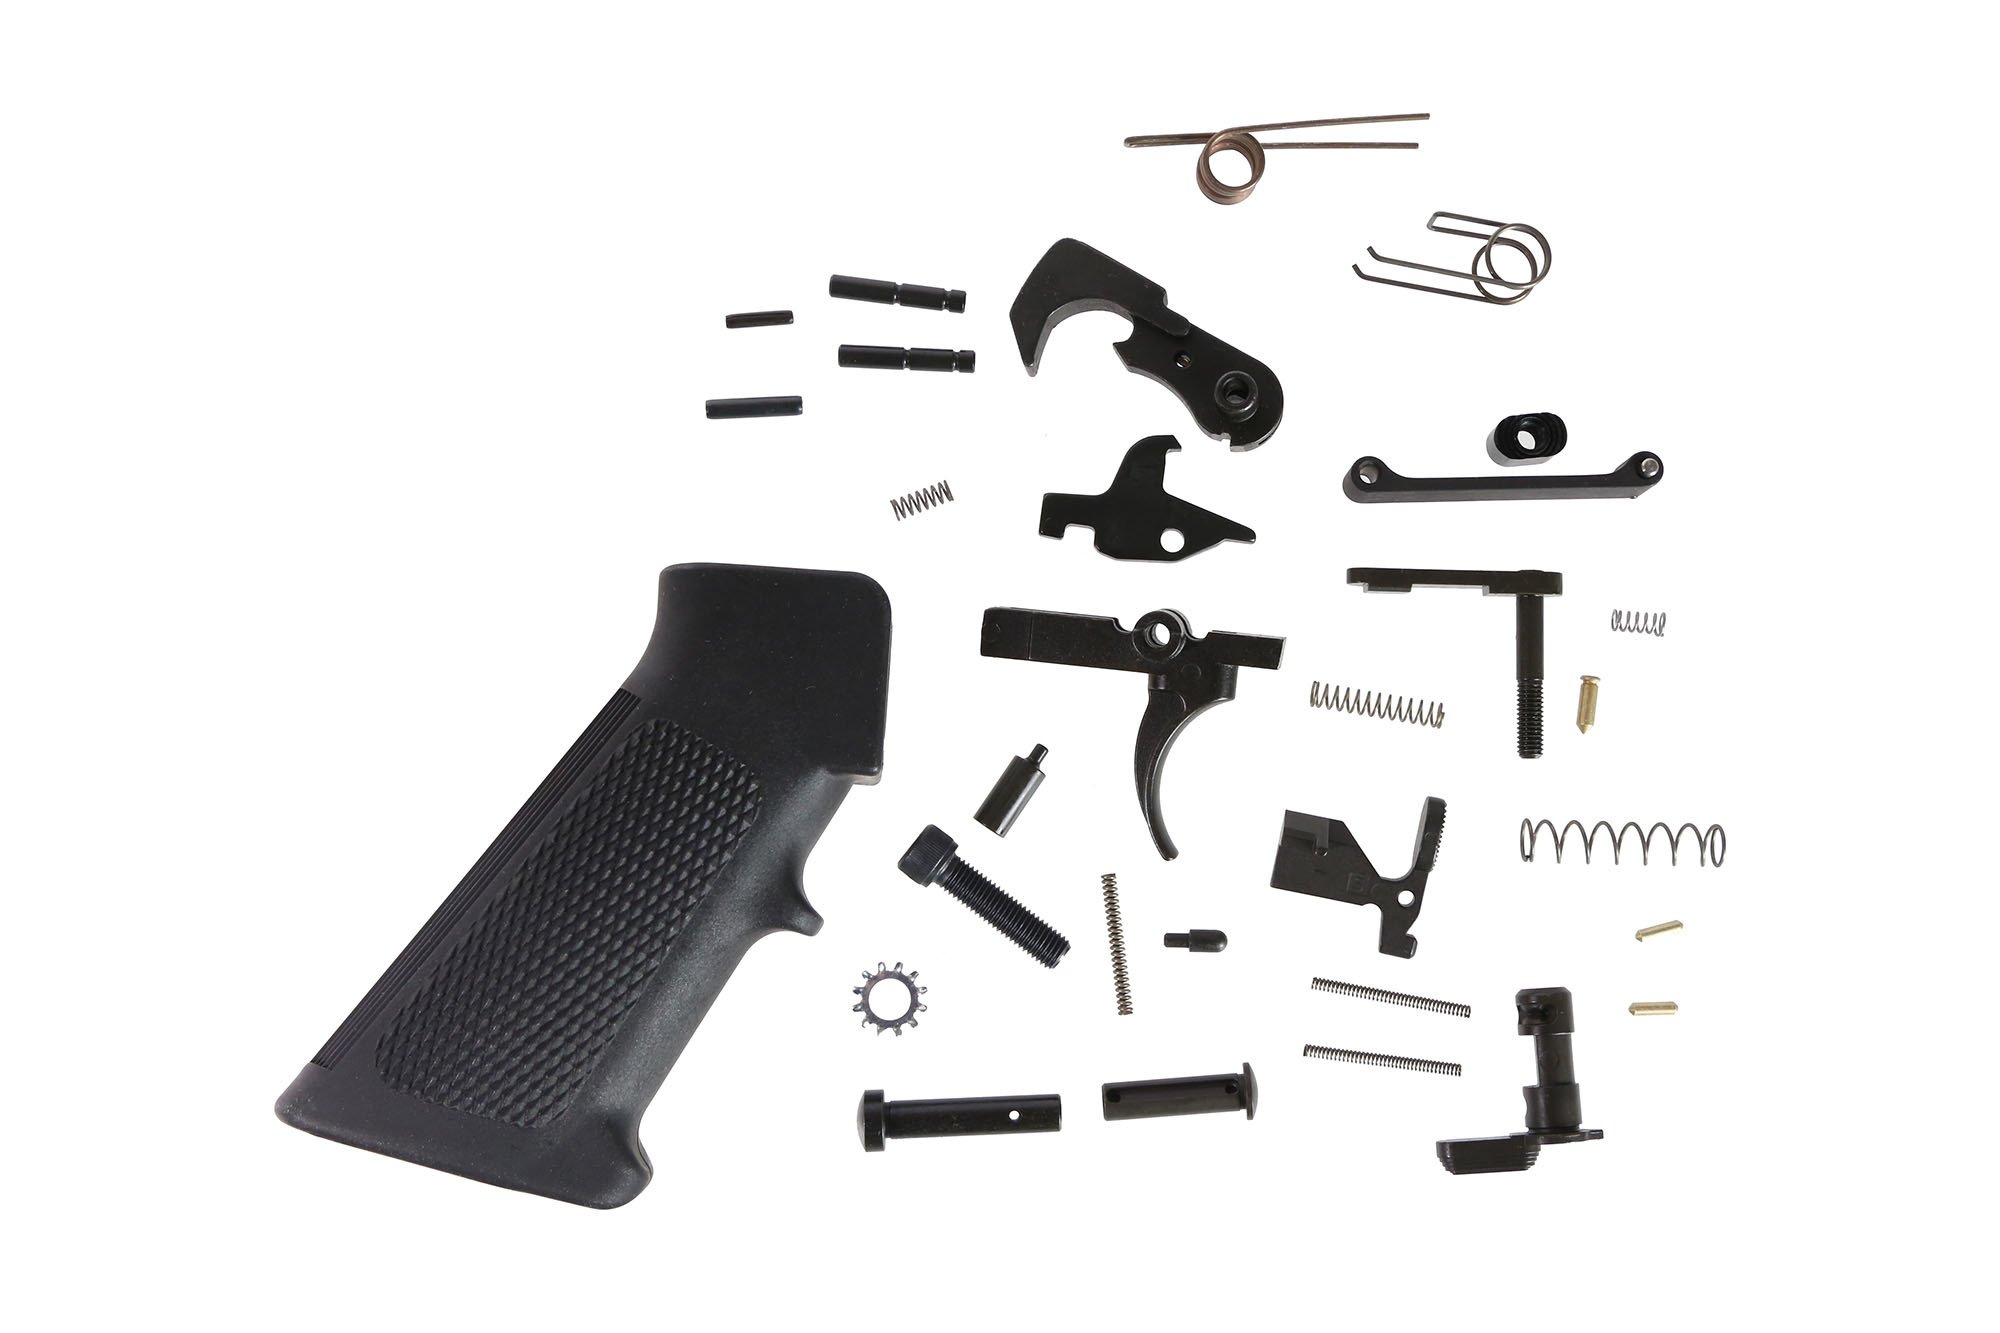 Rock River Arms AR-15 Lower Receiver Parts Kit - Single Stage Trigger - $62.99